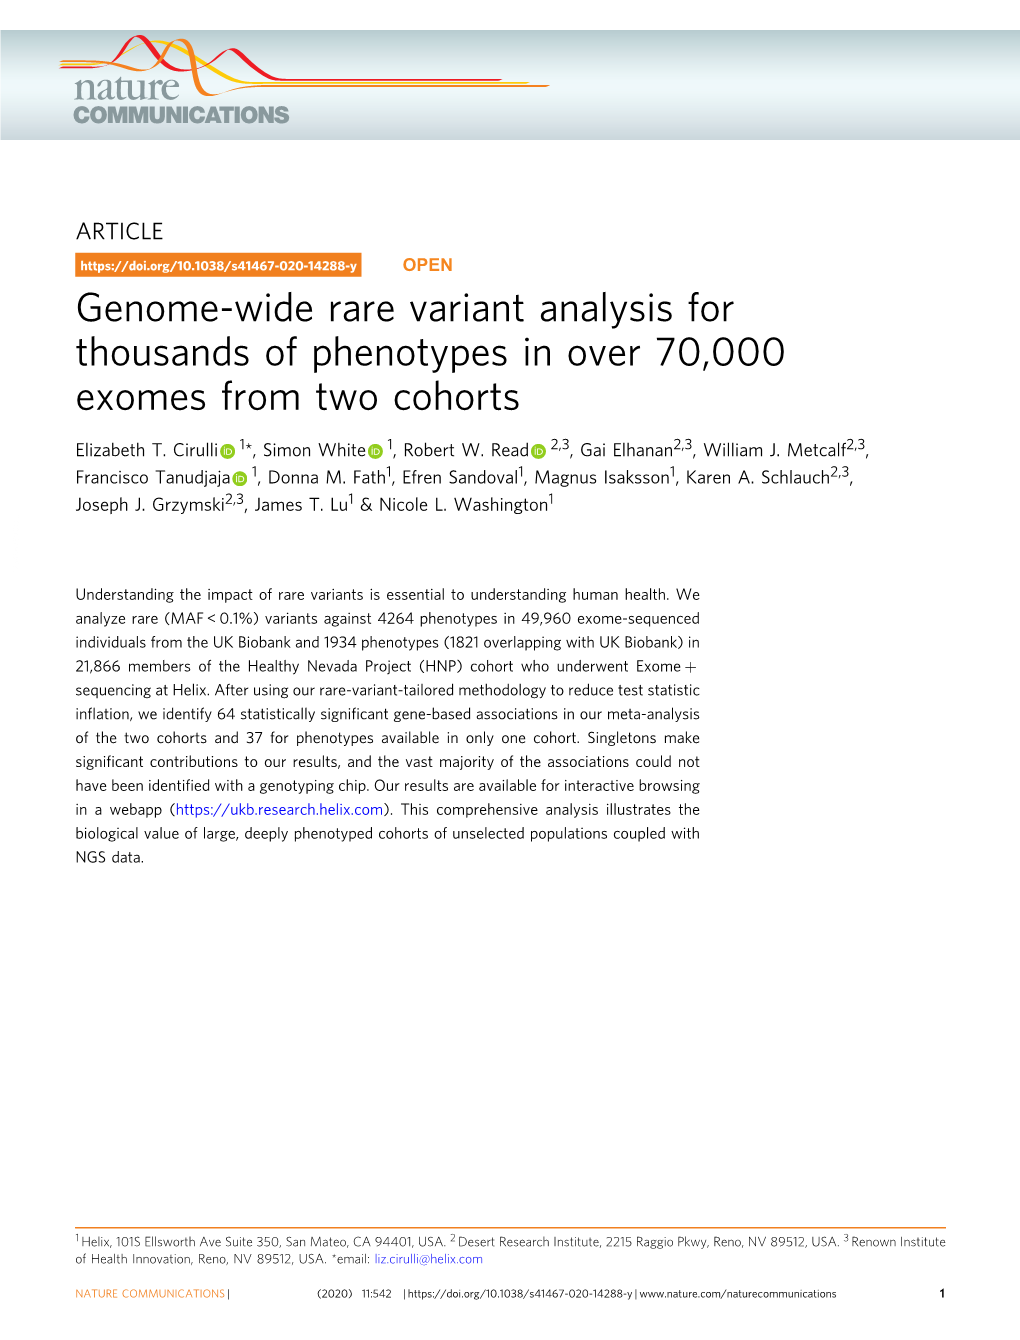 Genome-Wide Rare Variant Analysis for Thousands of Phenotypes in Over 70,000 Exomes from Two Cohorts